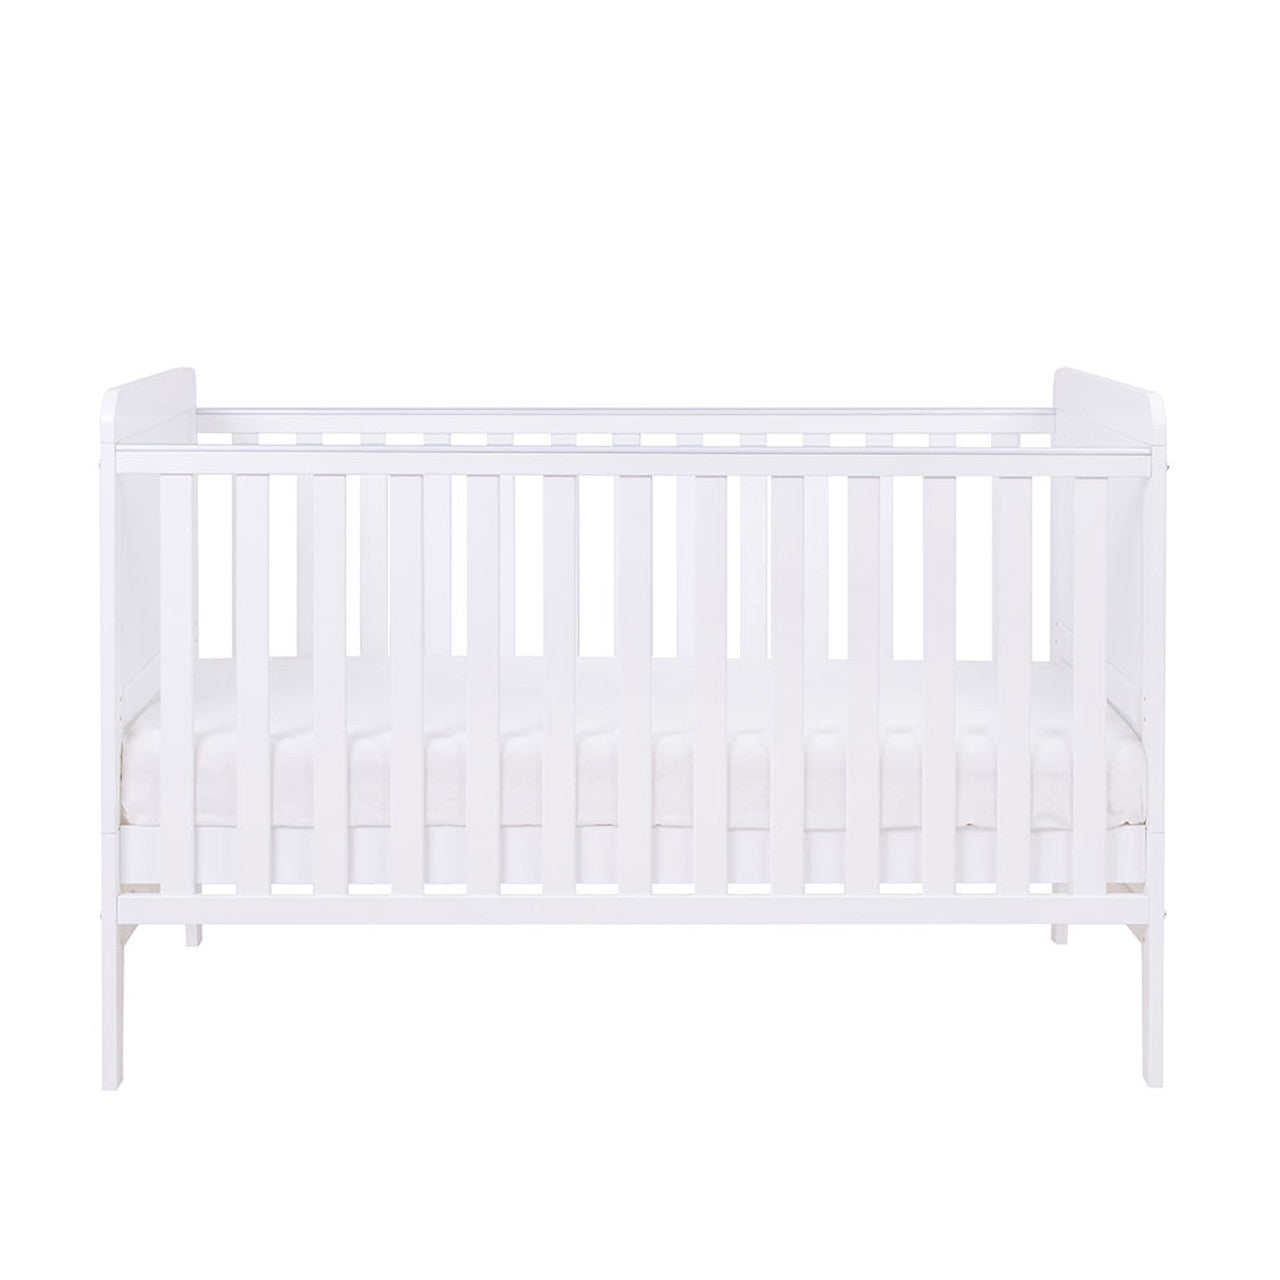 Tutti Bambini Rio 3 Piece Room Set - White - For Your Little One